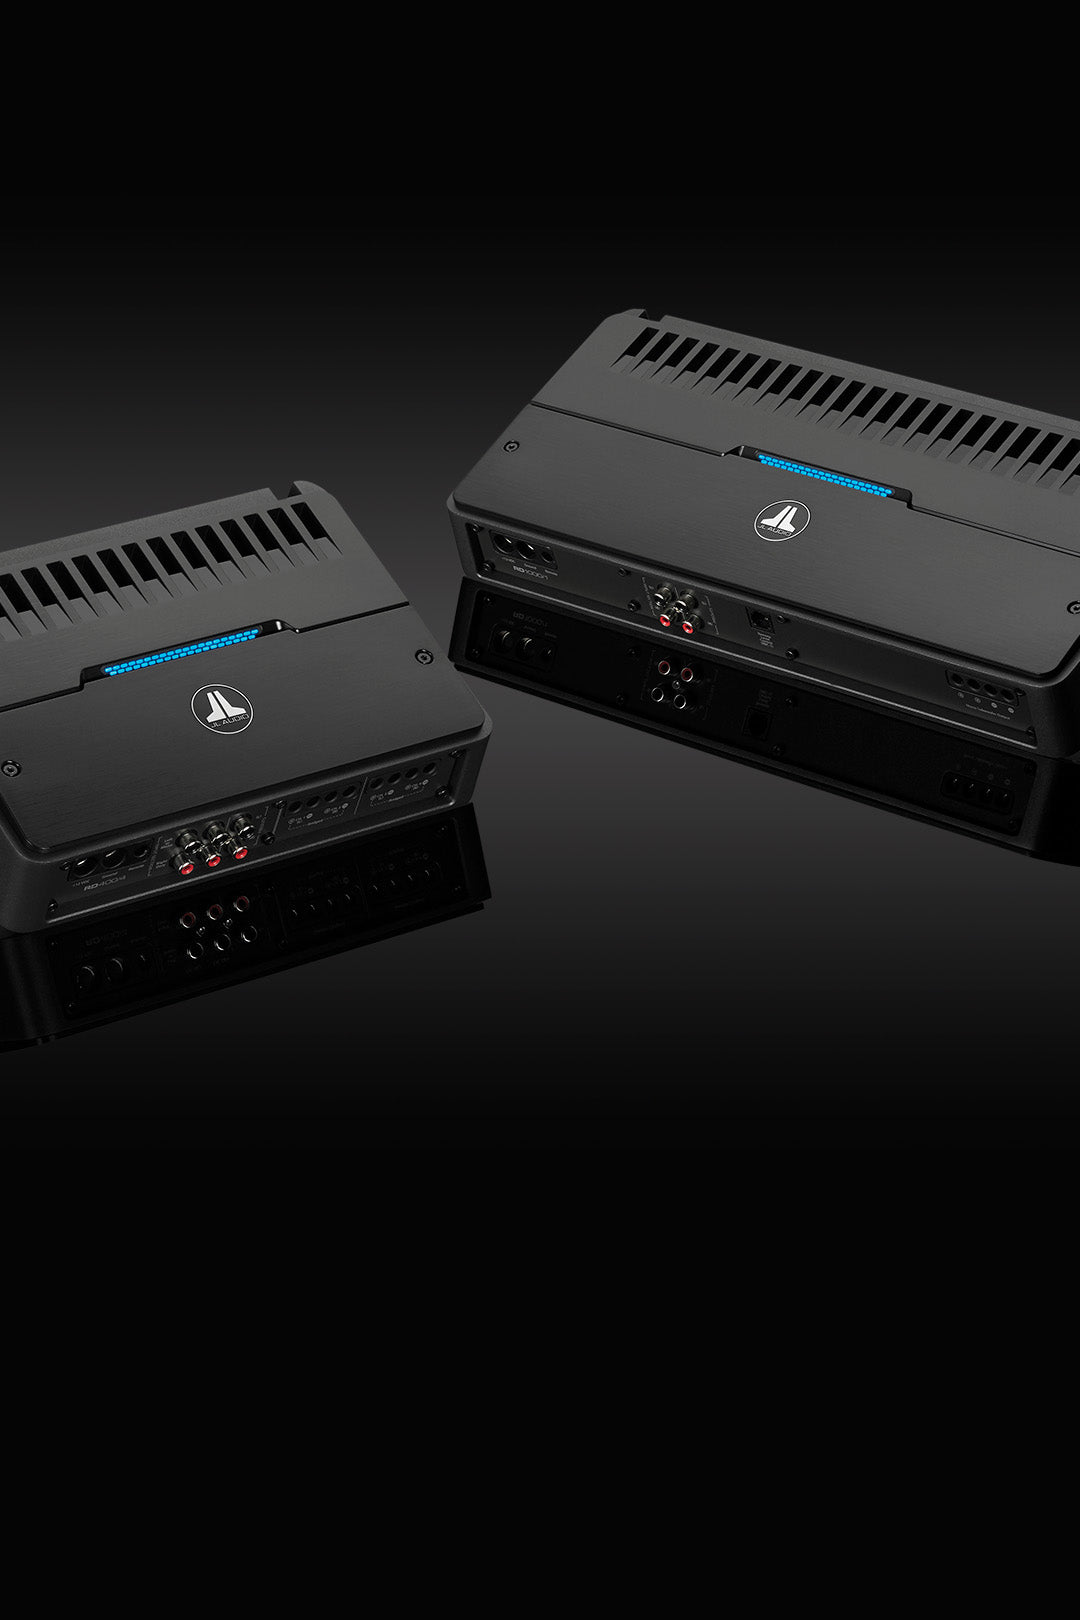 A pair of RD amplifiers on a sleek black surface.